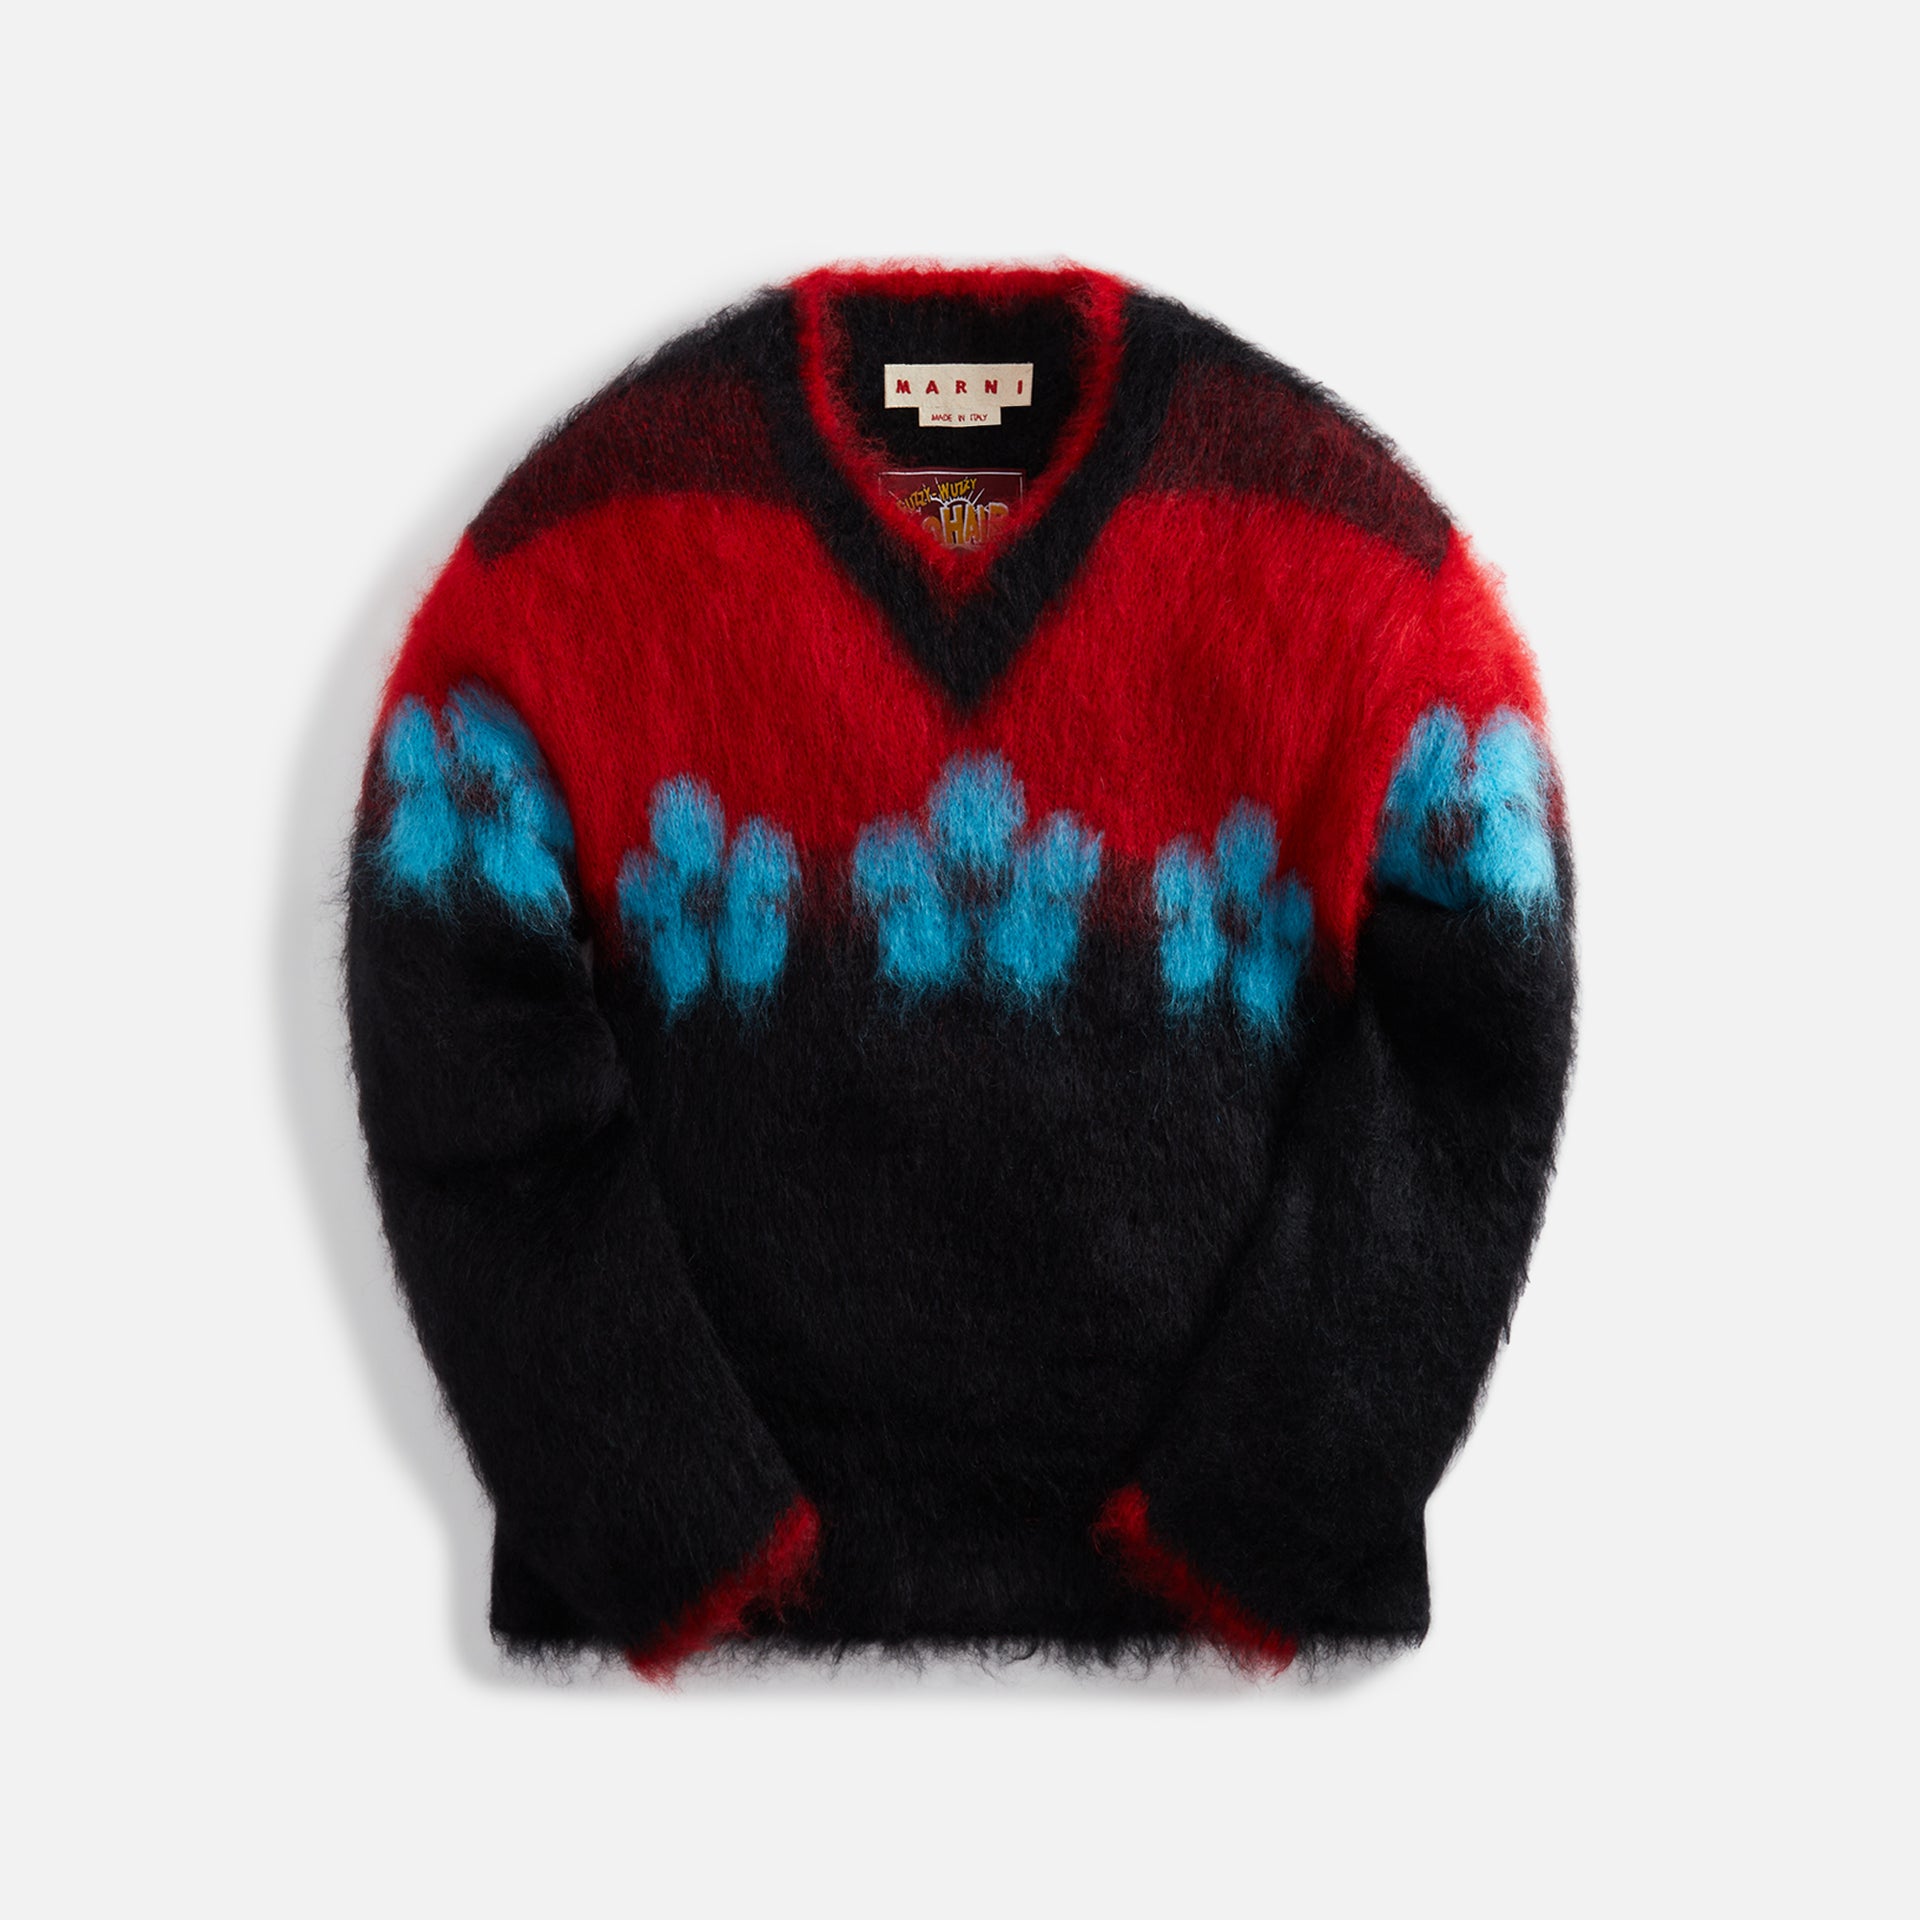 Marni Fuzzy Wuzzy Flowers Mohair Blend Sweater – Black / Red